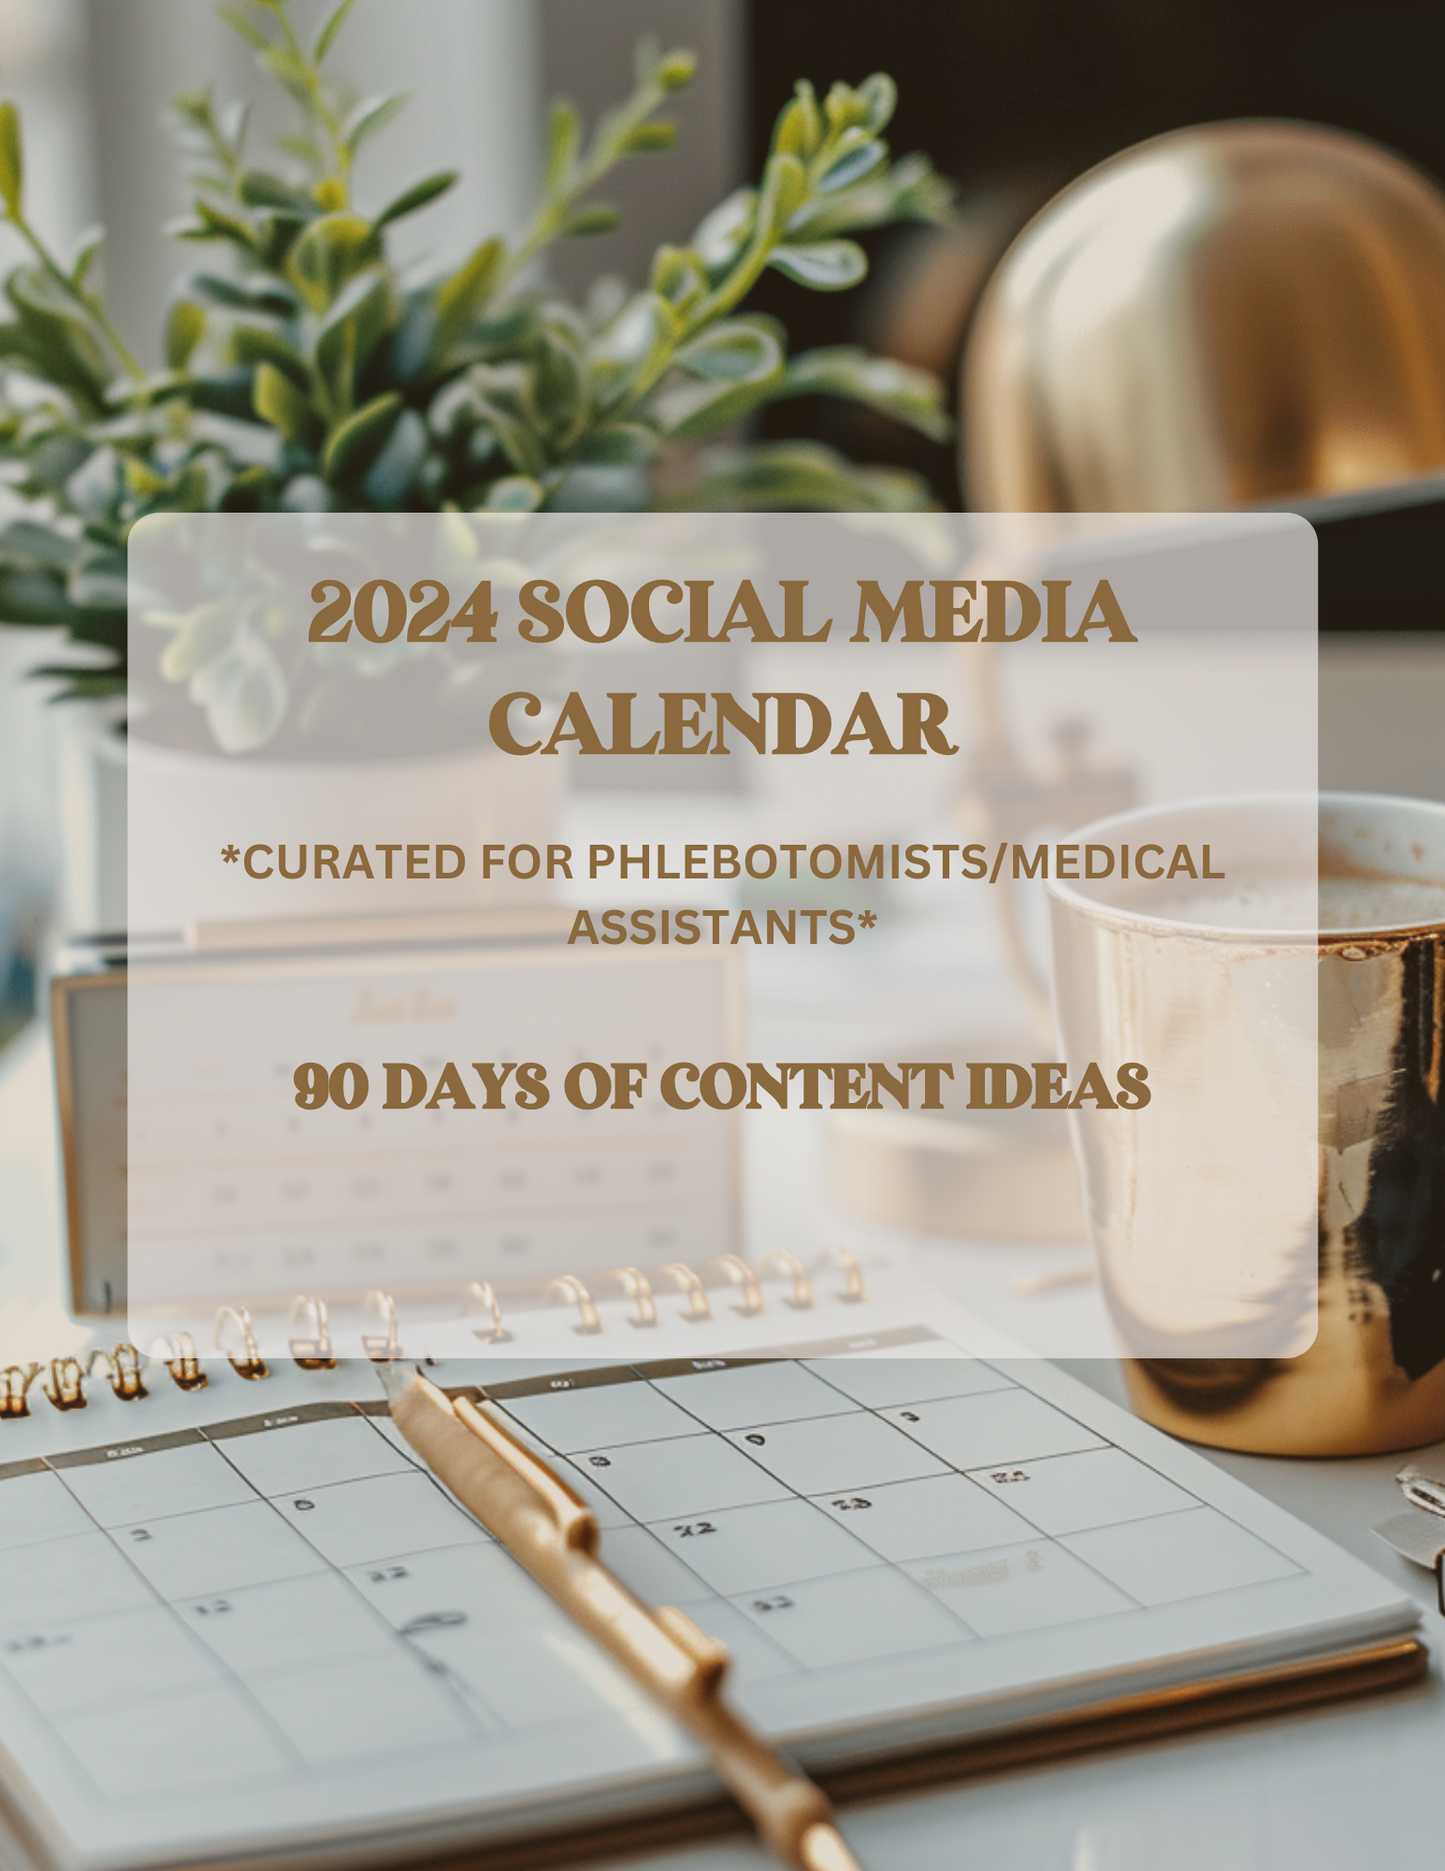 90 Days of Content Ideas (Curated for Mobile Phlebotomists/Medical Assistants)